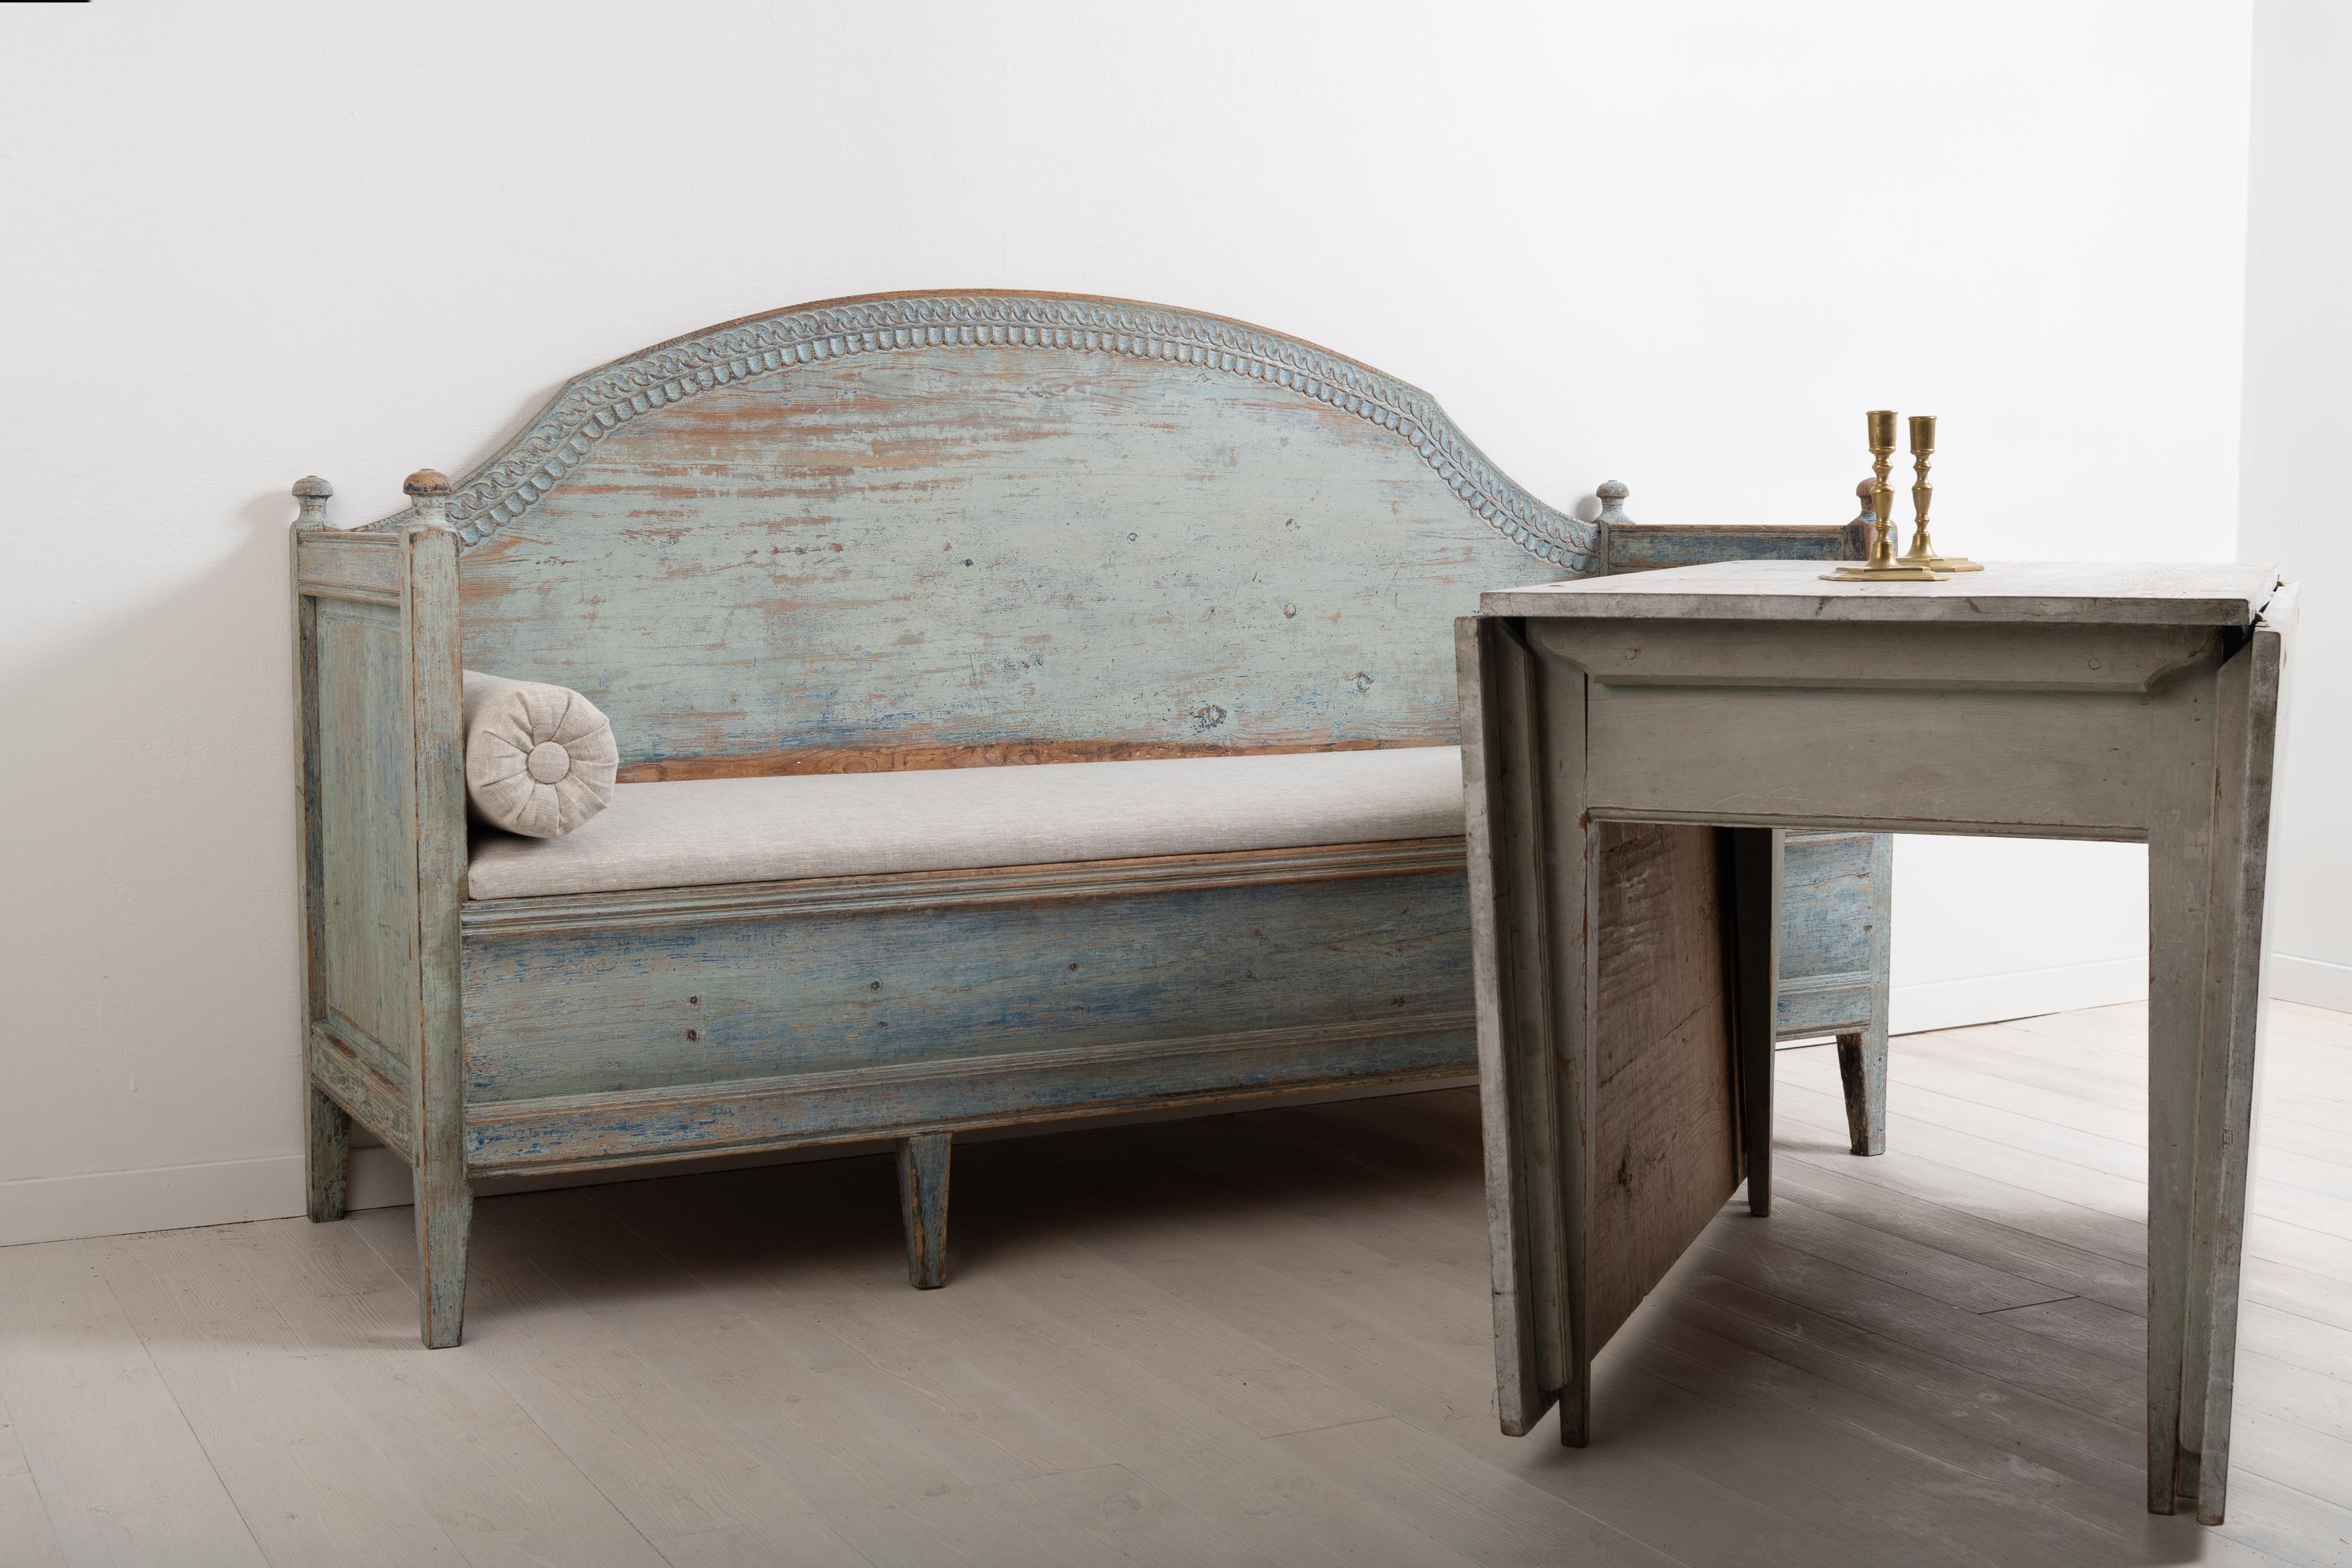 Late 18th century unusual Gustavian sofa from northern Sweden. The sofa has a straight model with a curved back and decorations carved to look like leafs. Good patina. Dry scarped to the original blue paint. The seat is later, likely from the 1800s